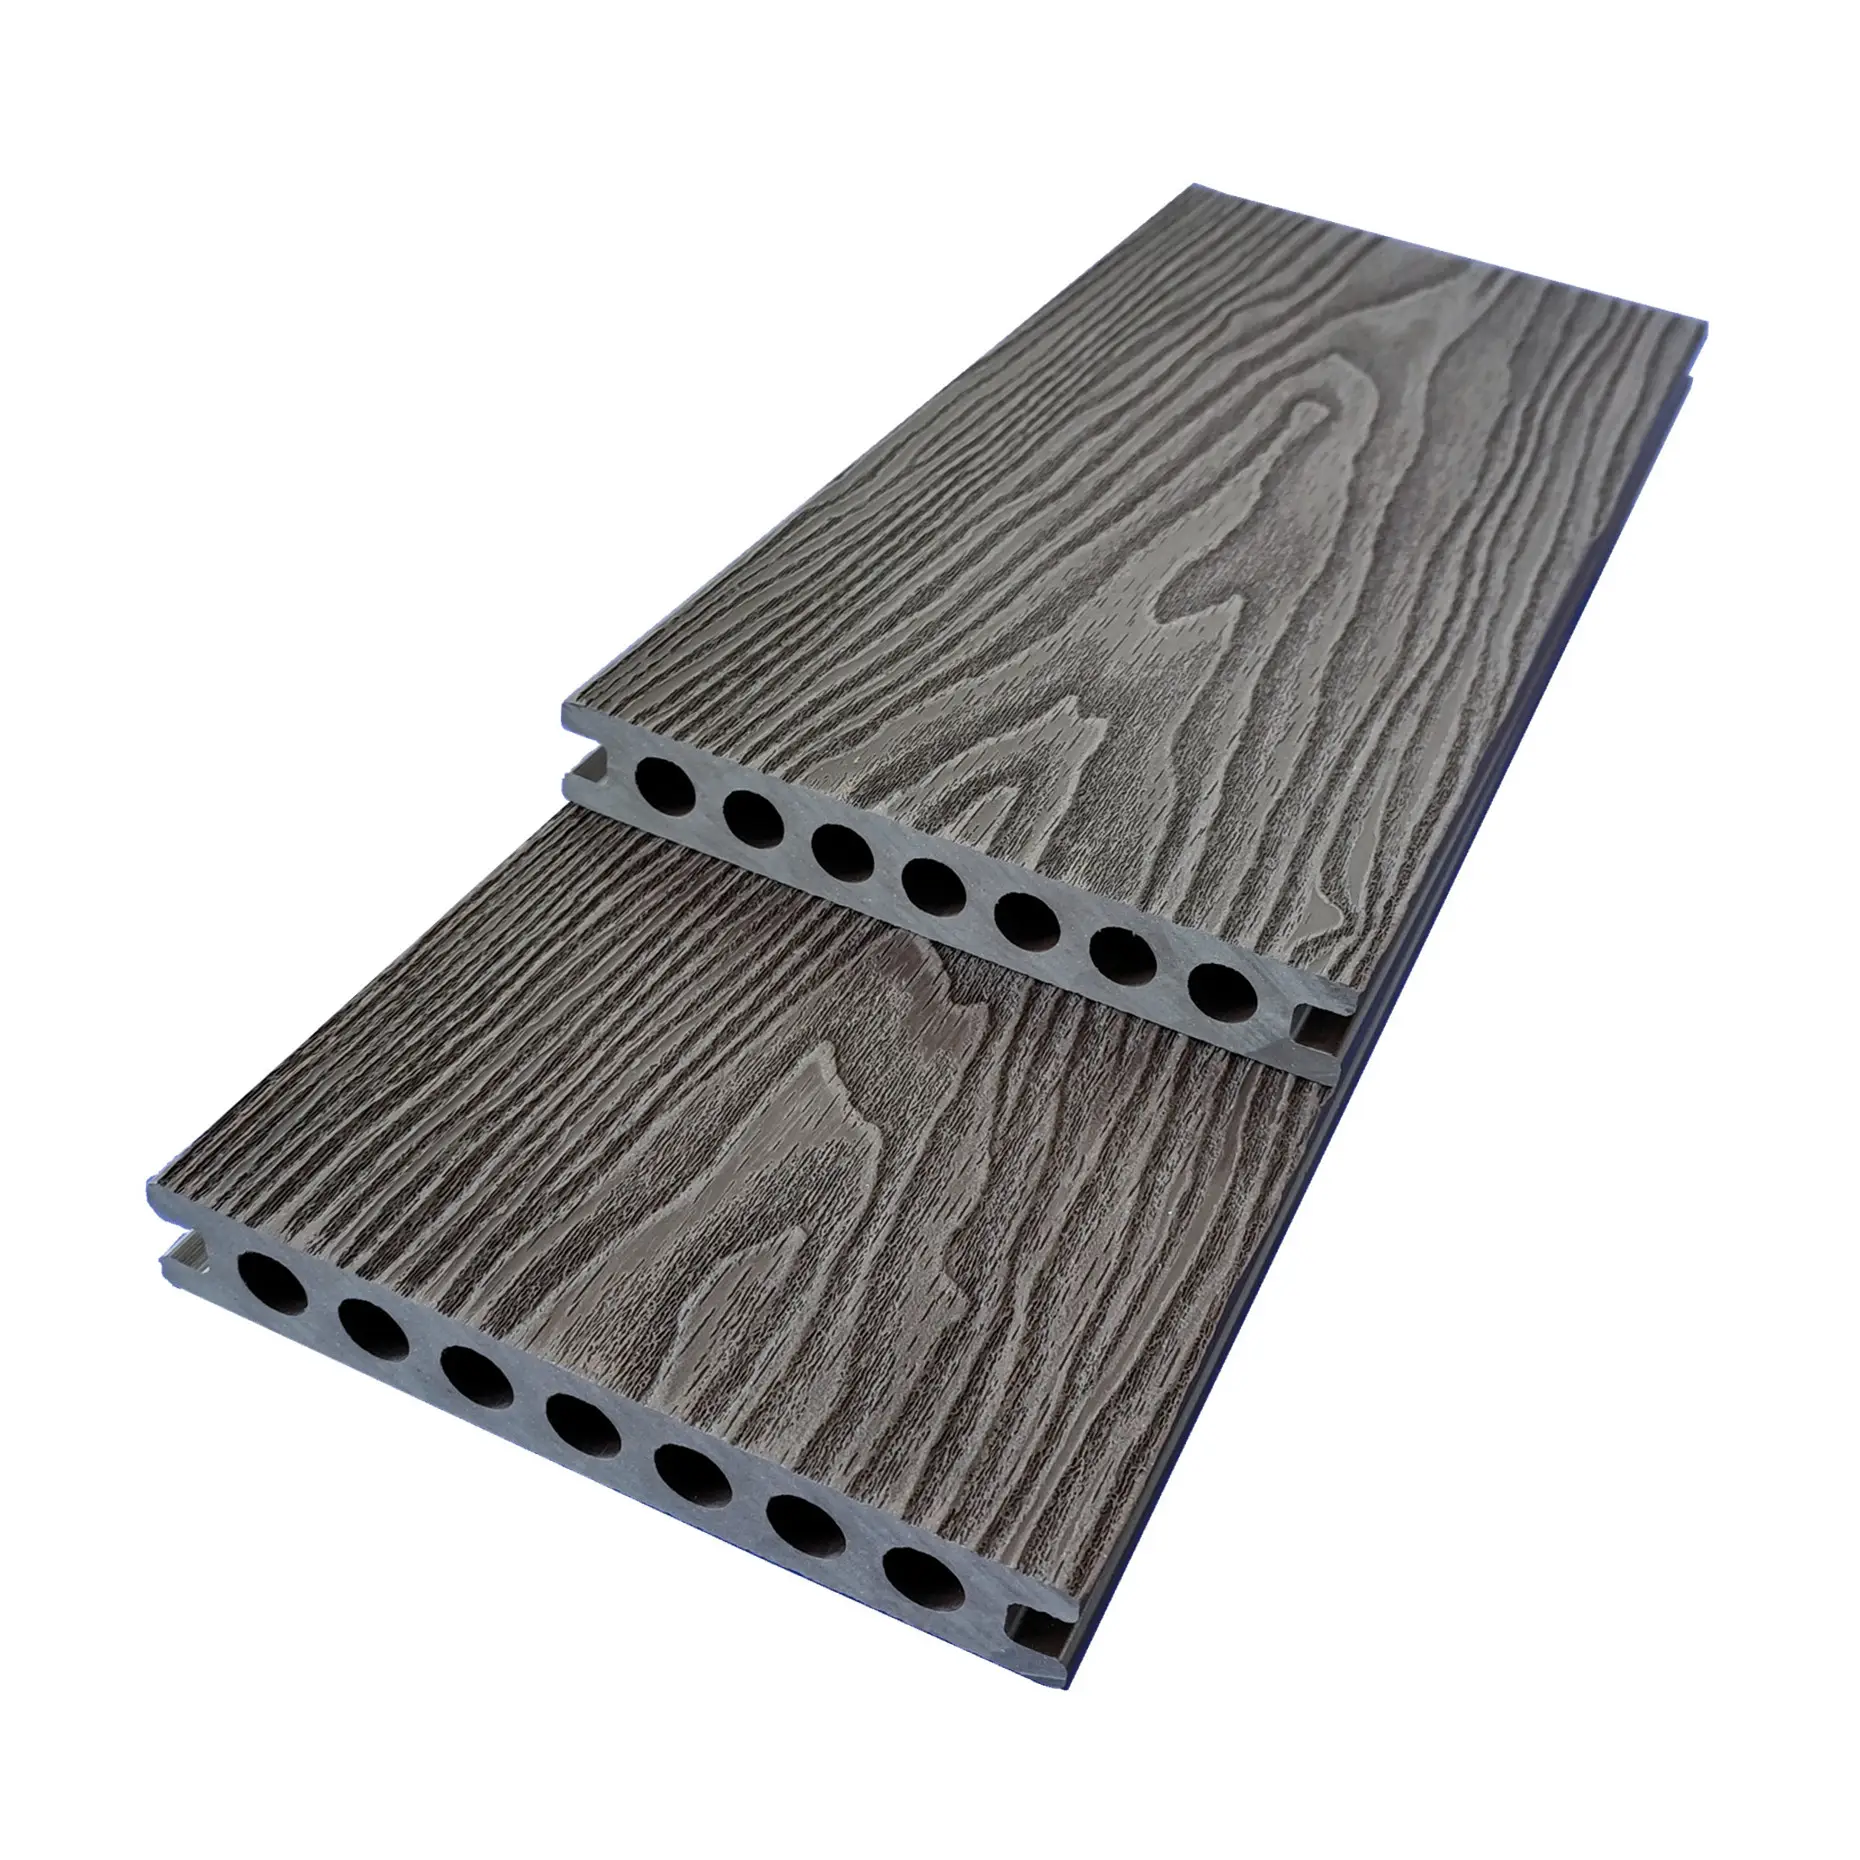 Various Sizes Wood Plastic Composite Fireproof Wpc Decking Boards Floor Panel